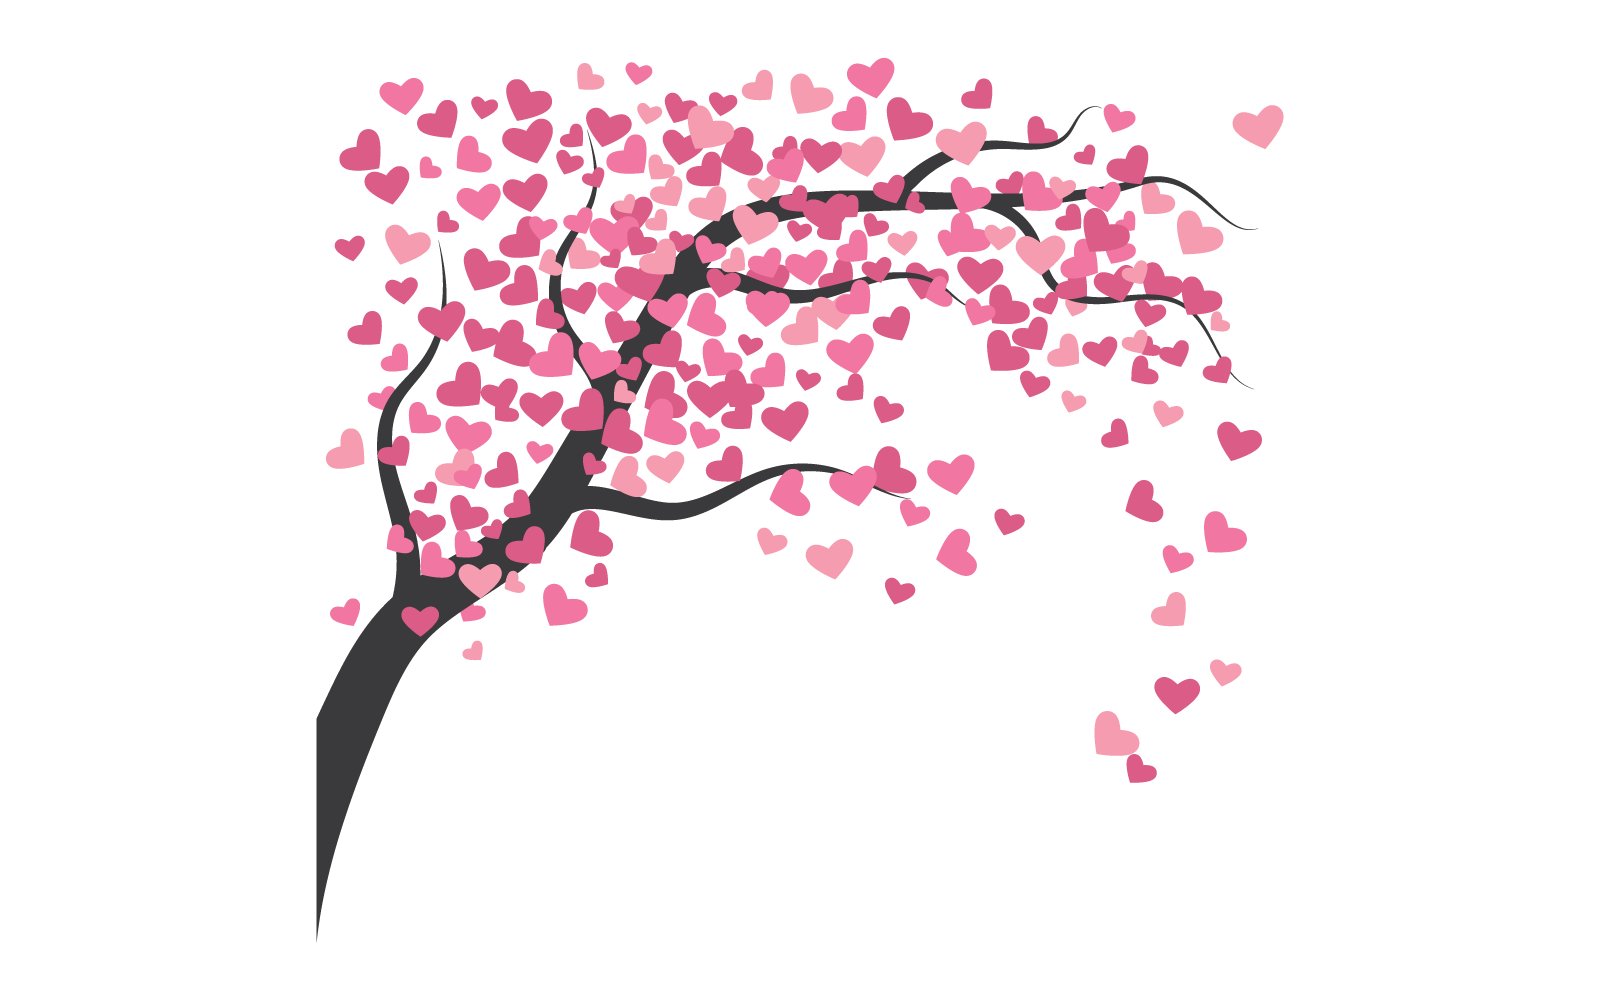 Tree With Heart Leaves Vector On White Background